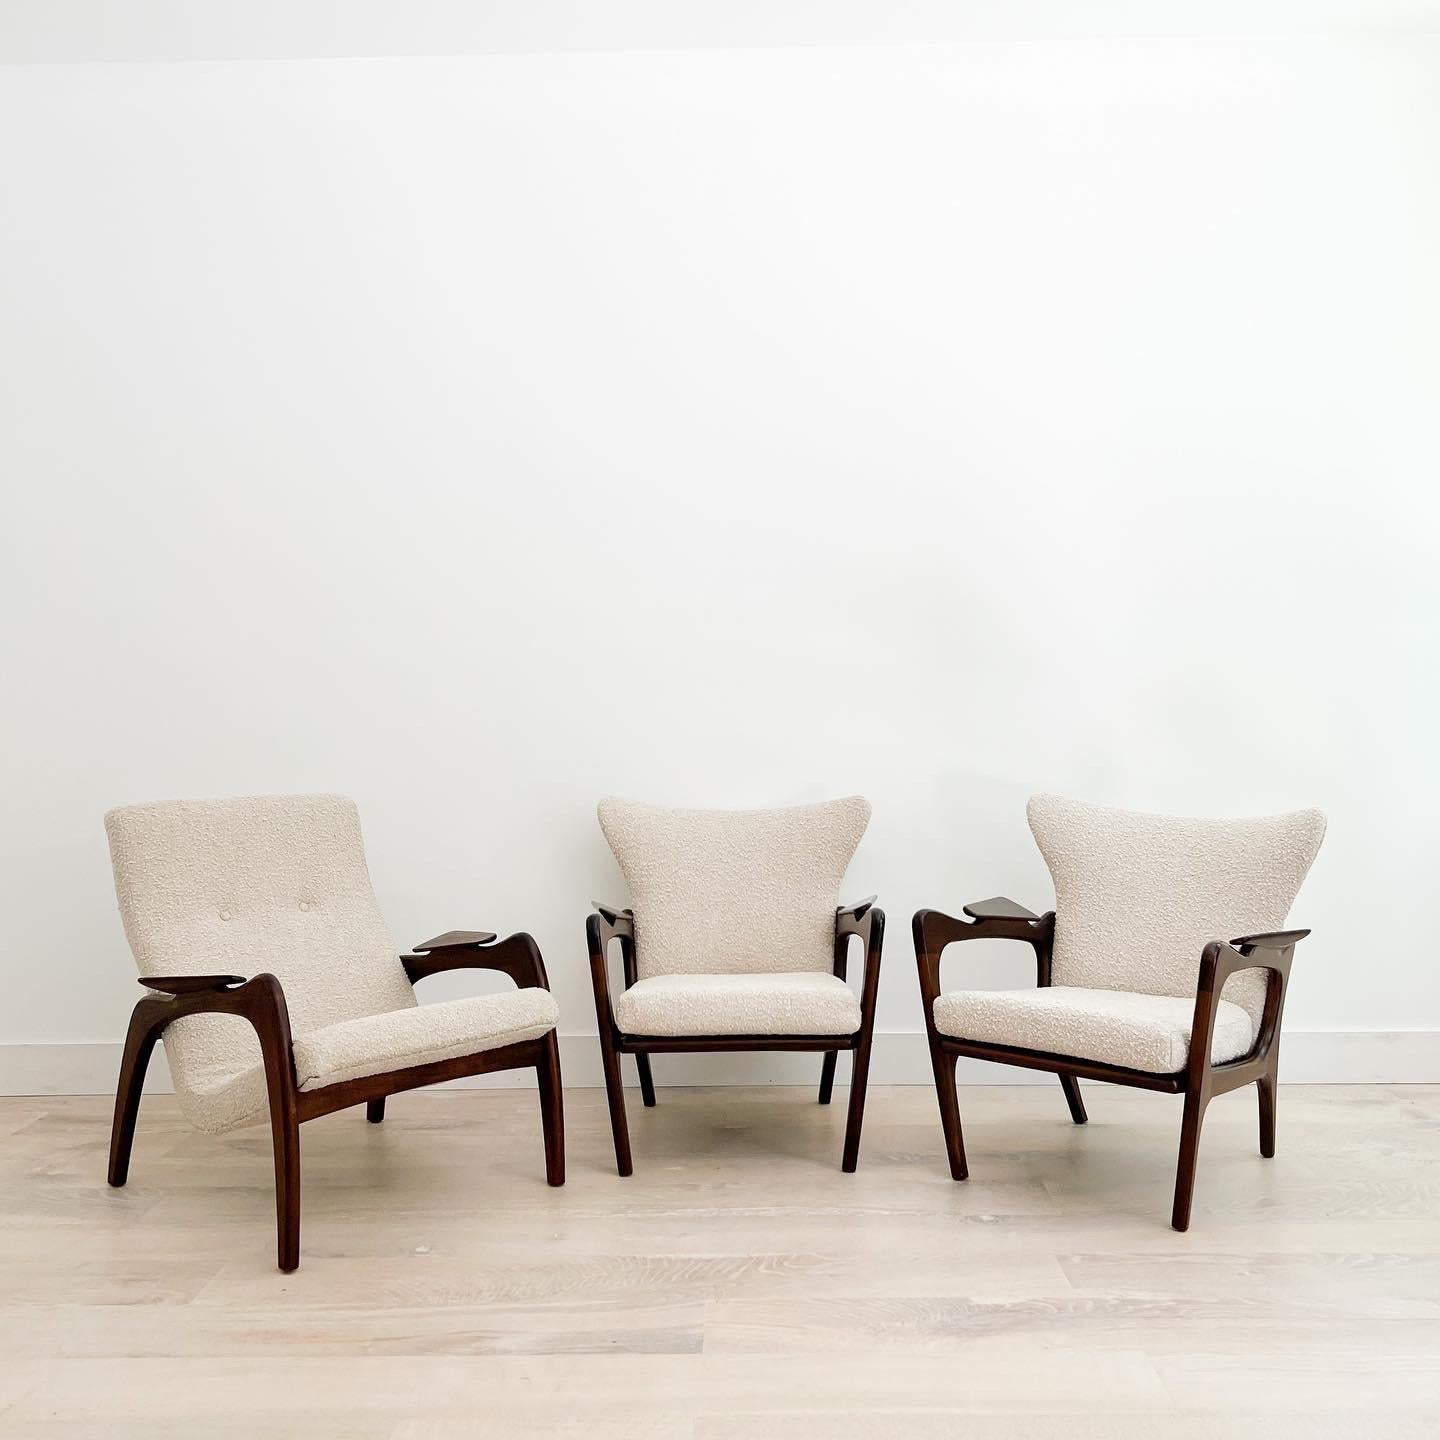 Hard to find, set of 3 Adrian Pearsall lounge chairs!

Pair of Mid-Century Modern wingback lounge chairs designed by Adrian Pearsall for Craft Associates. The sculpted solid walnut wood frames are in good condition overall with only light